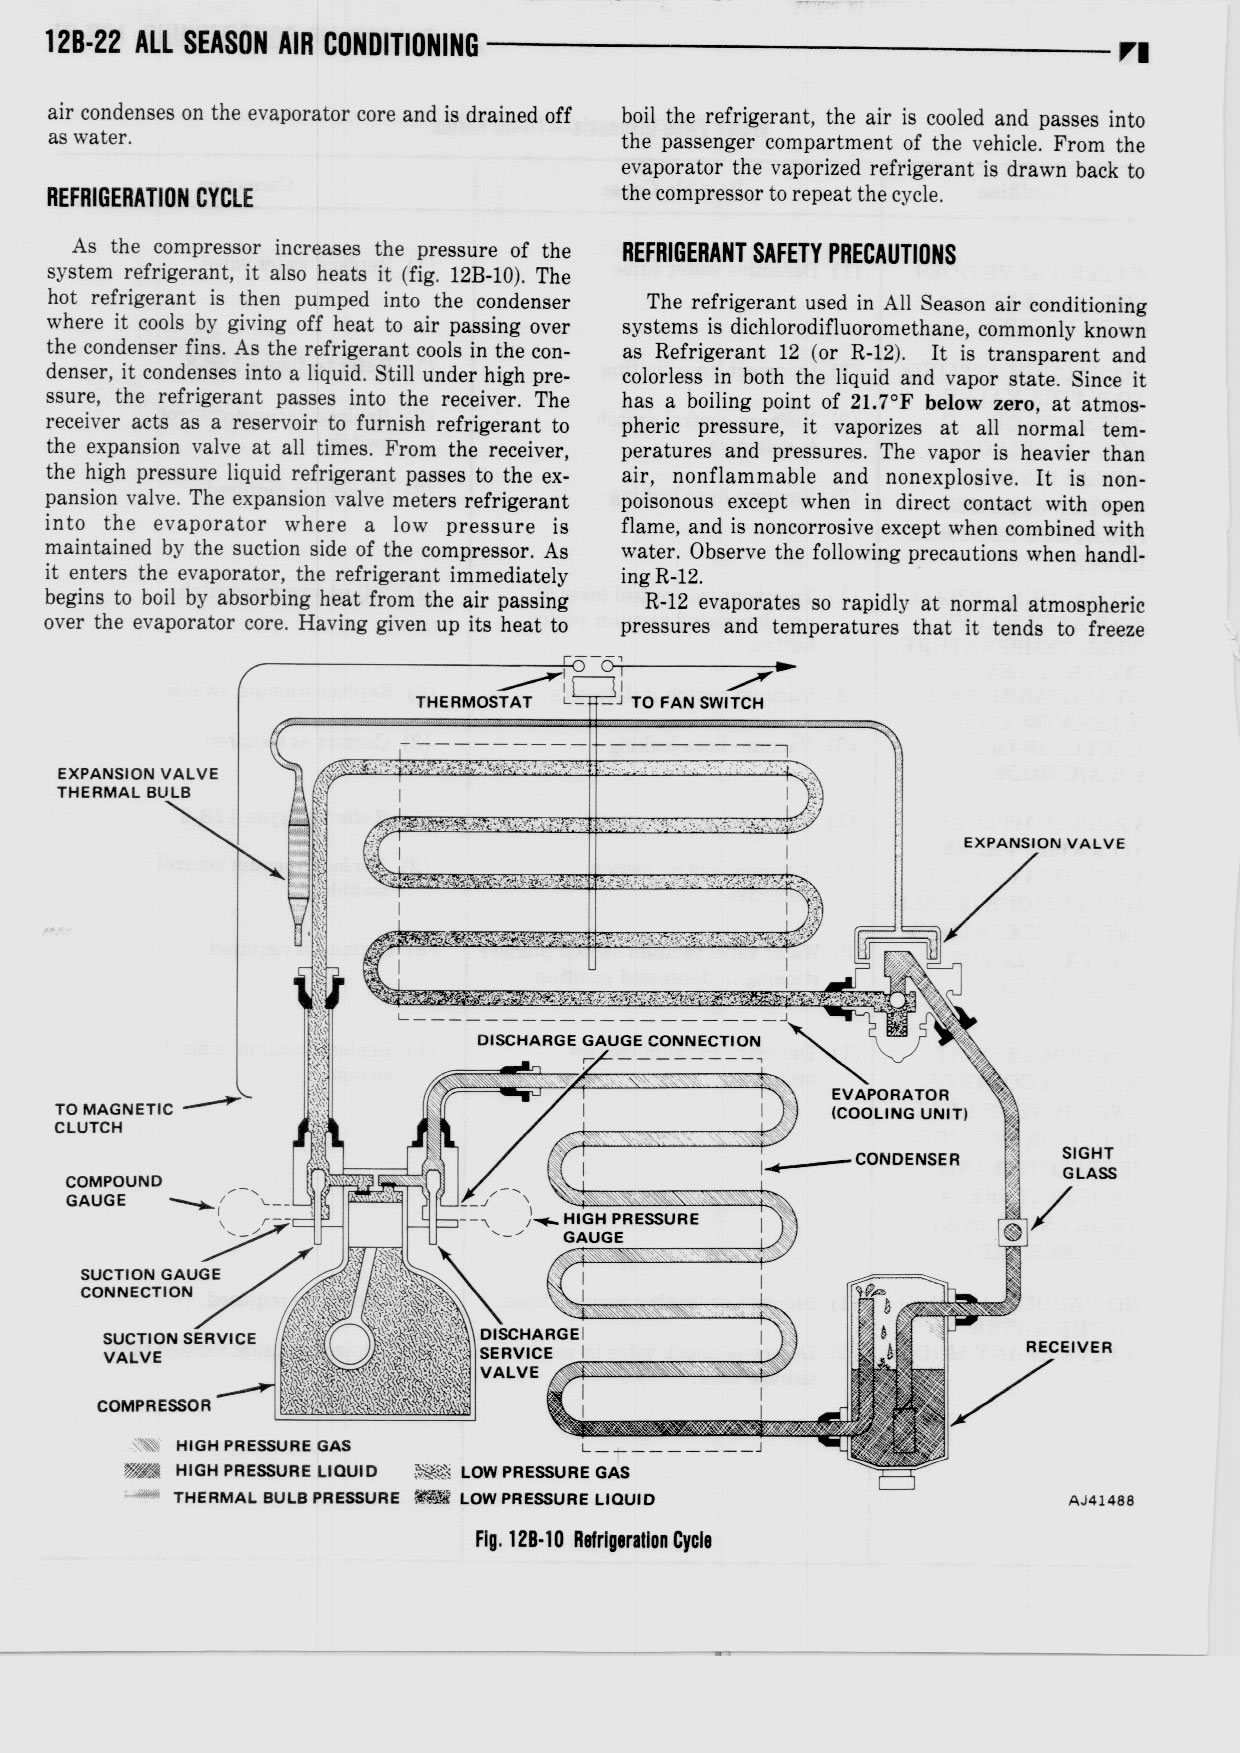 12B Air Conditioning / 1976 AMC Technical Service Manual_Page_686.jpg